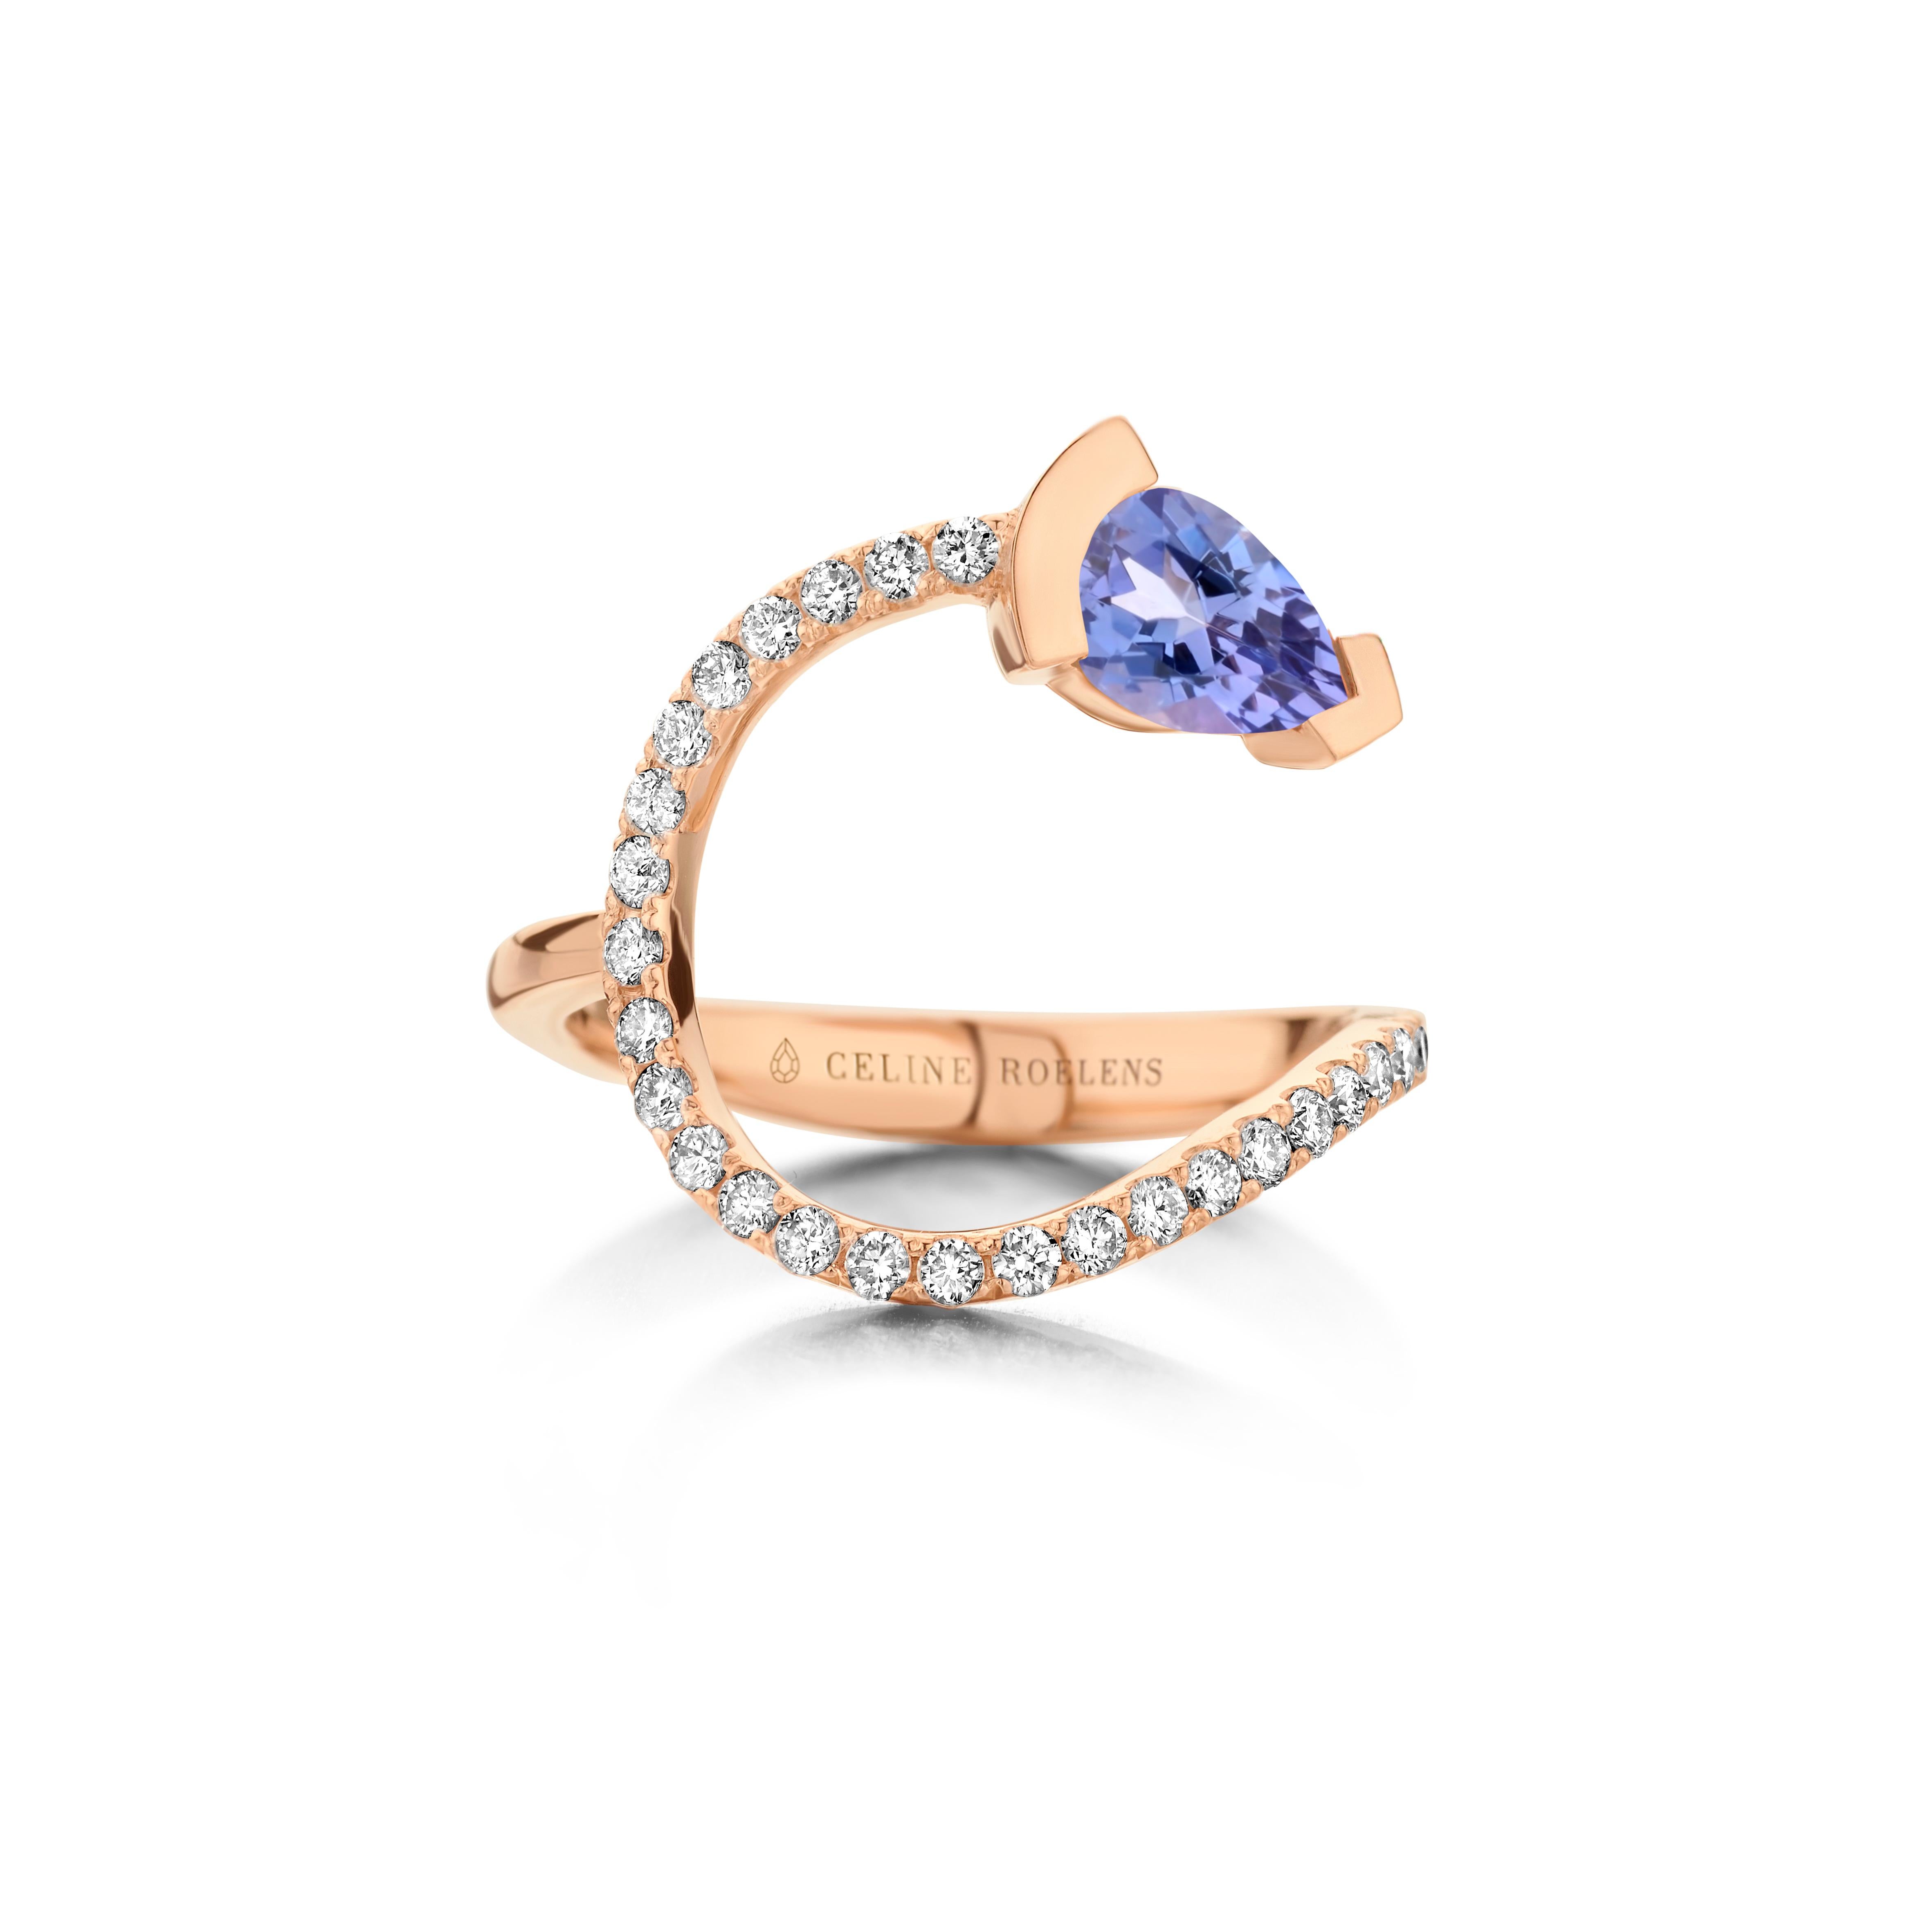 ADELINE curved ring in 18Kt white gold set with a pear shaped Tanzanite and 0,33 Ct of white brilliant cut diamonds - VS F quality.